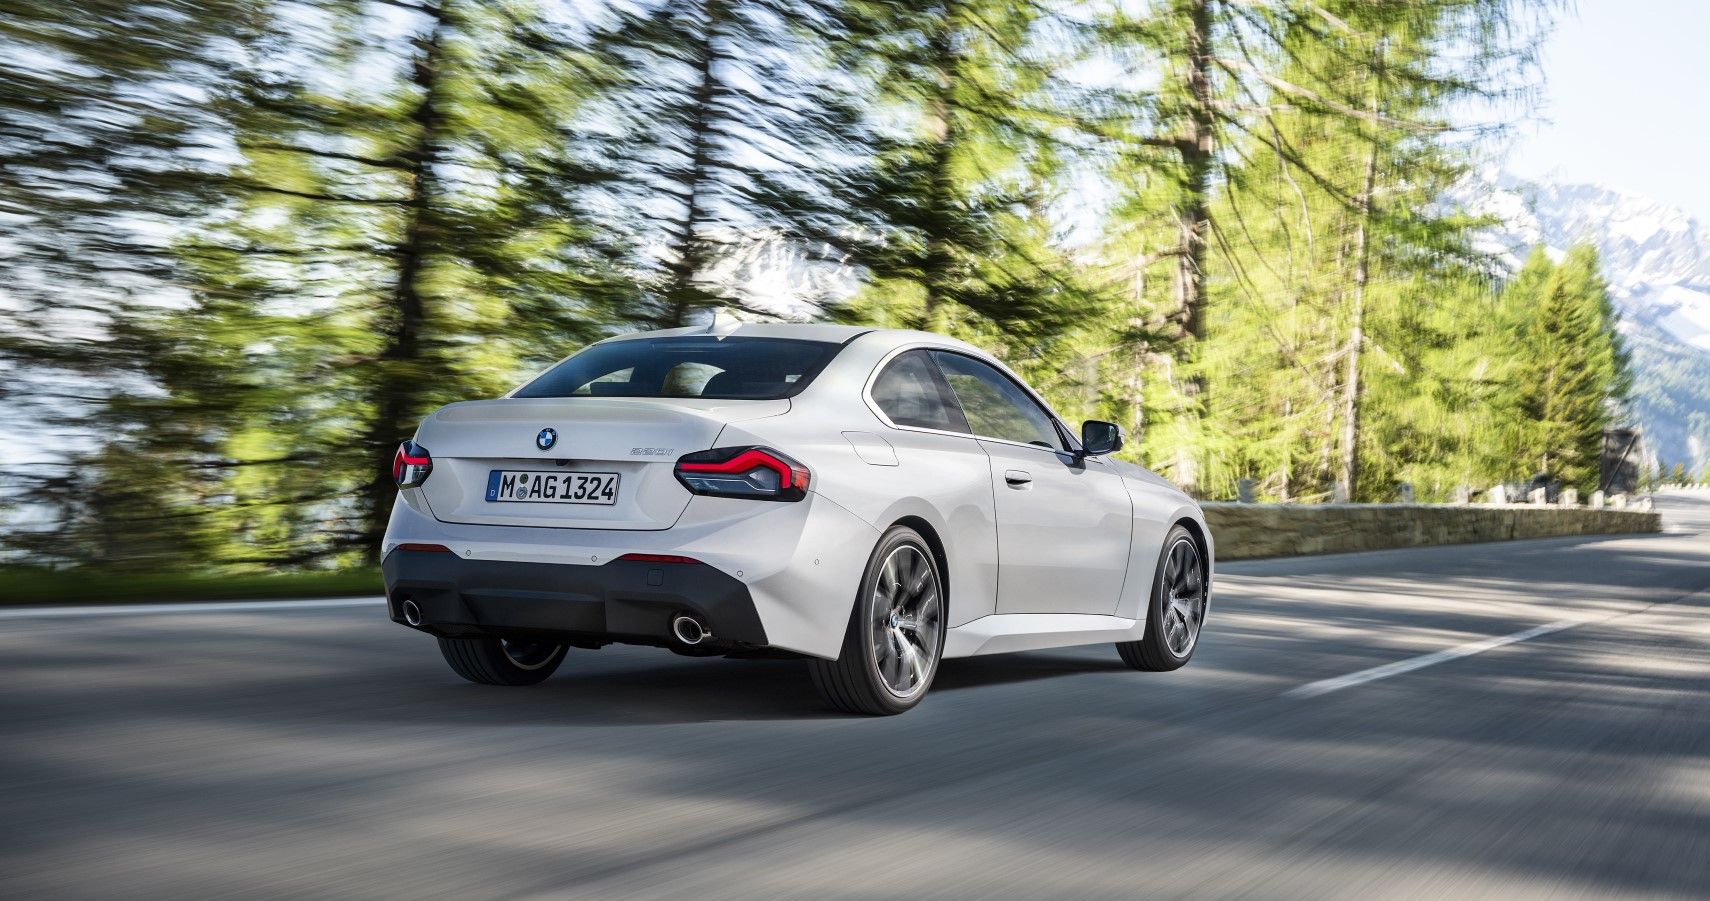 2022 BMW 2-Series Coupe rear third quarter accelerating view